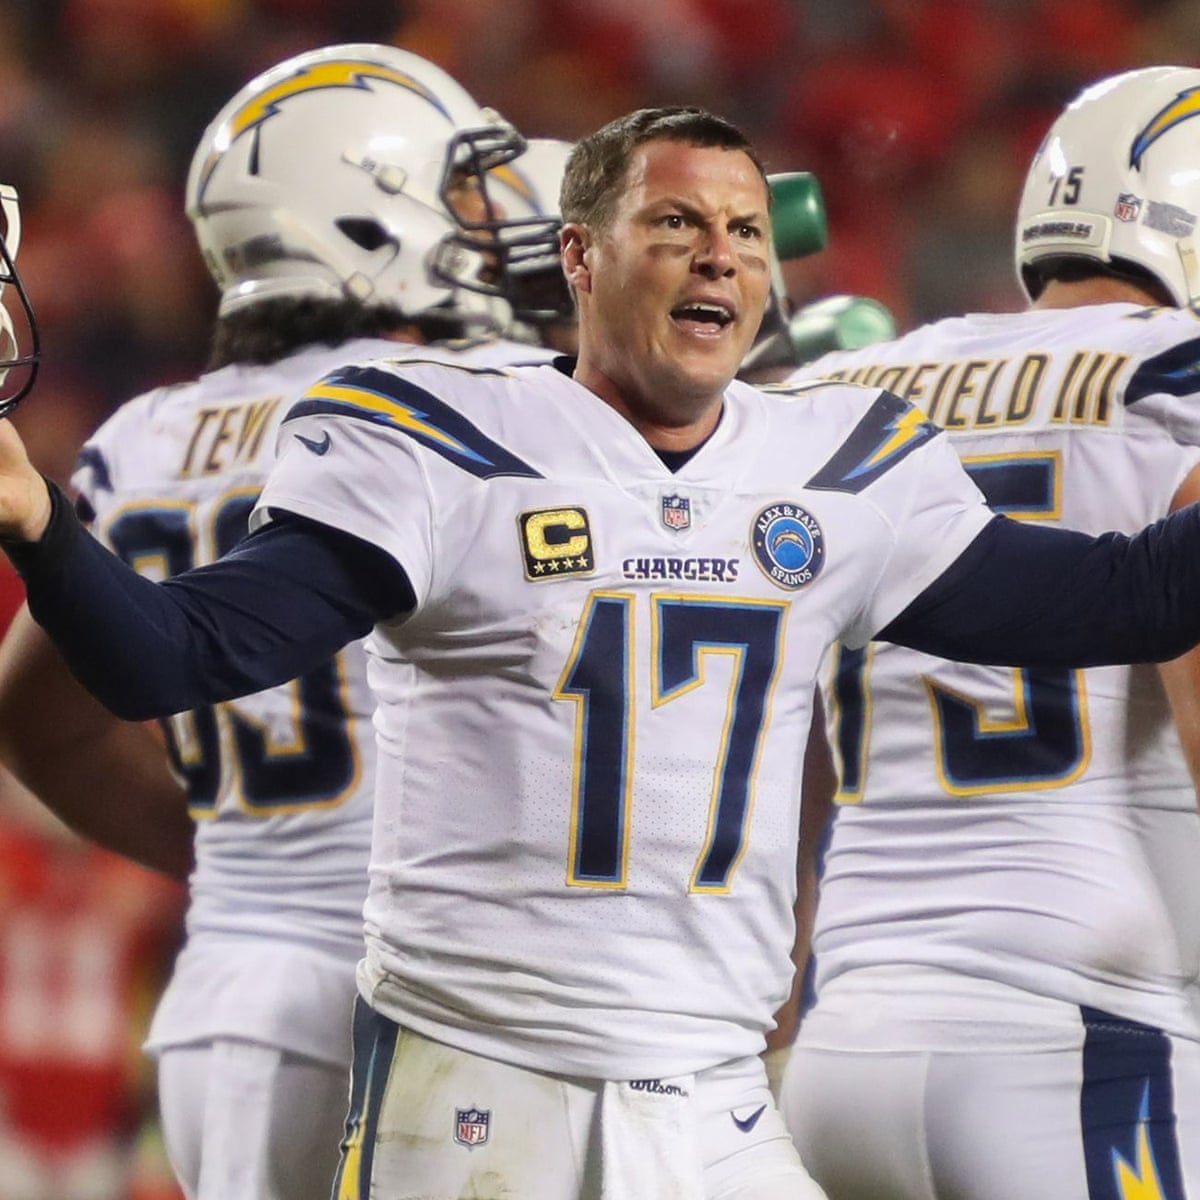 Chargers lead Pro Bowl selections as Tom Brady ties Manning's NFL